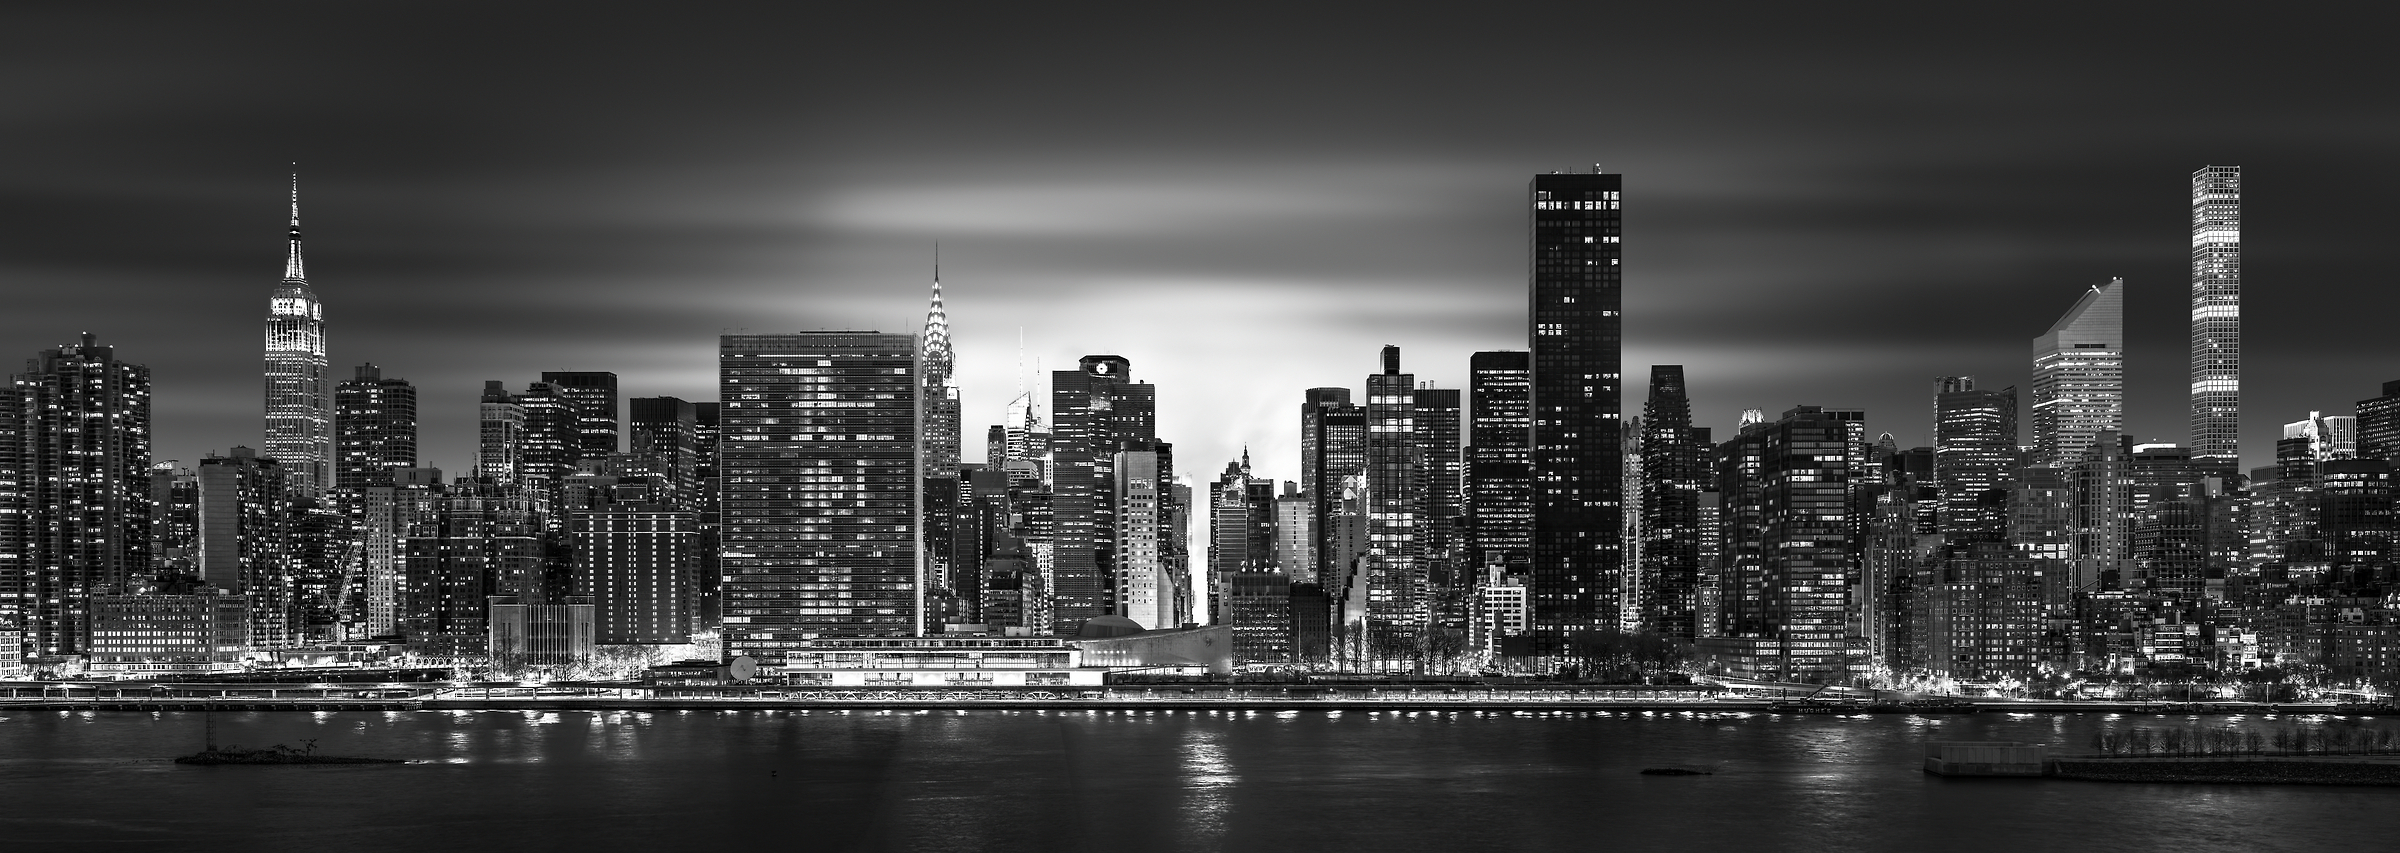 4,122 megapixels! A very high resolution, large-format VAST photo print of the NYC skyline at night with the East River; cityscape photo created by Dan Piech